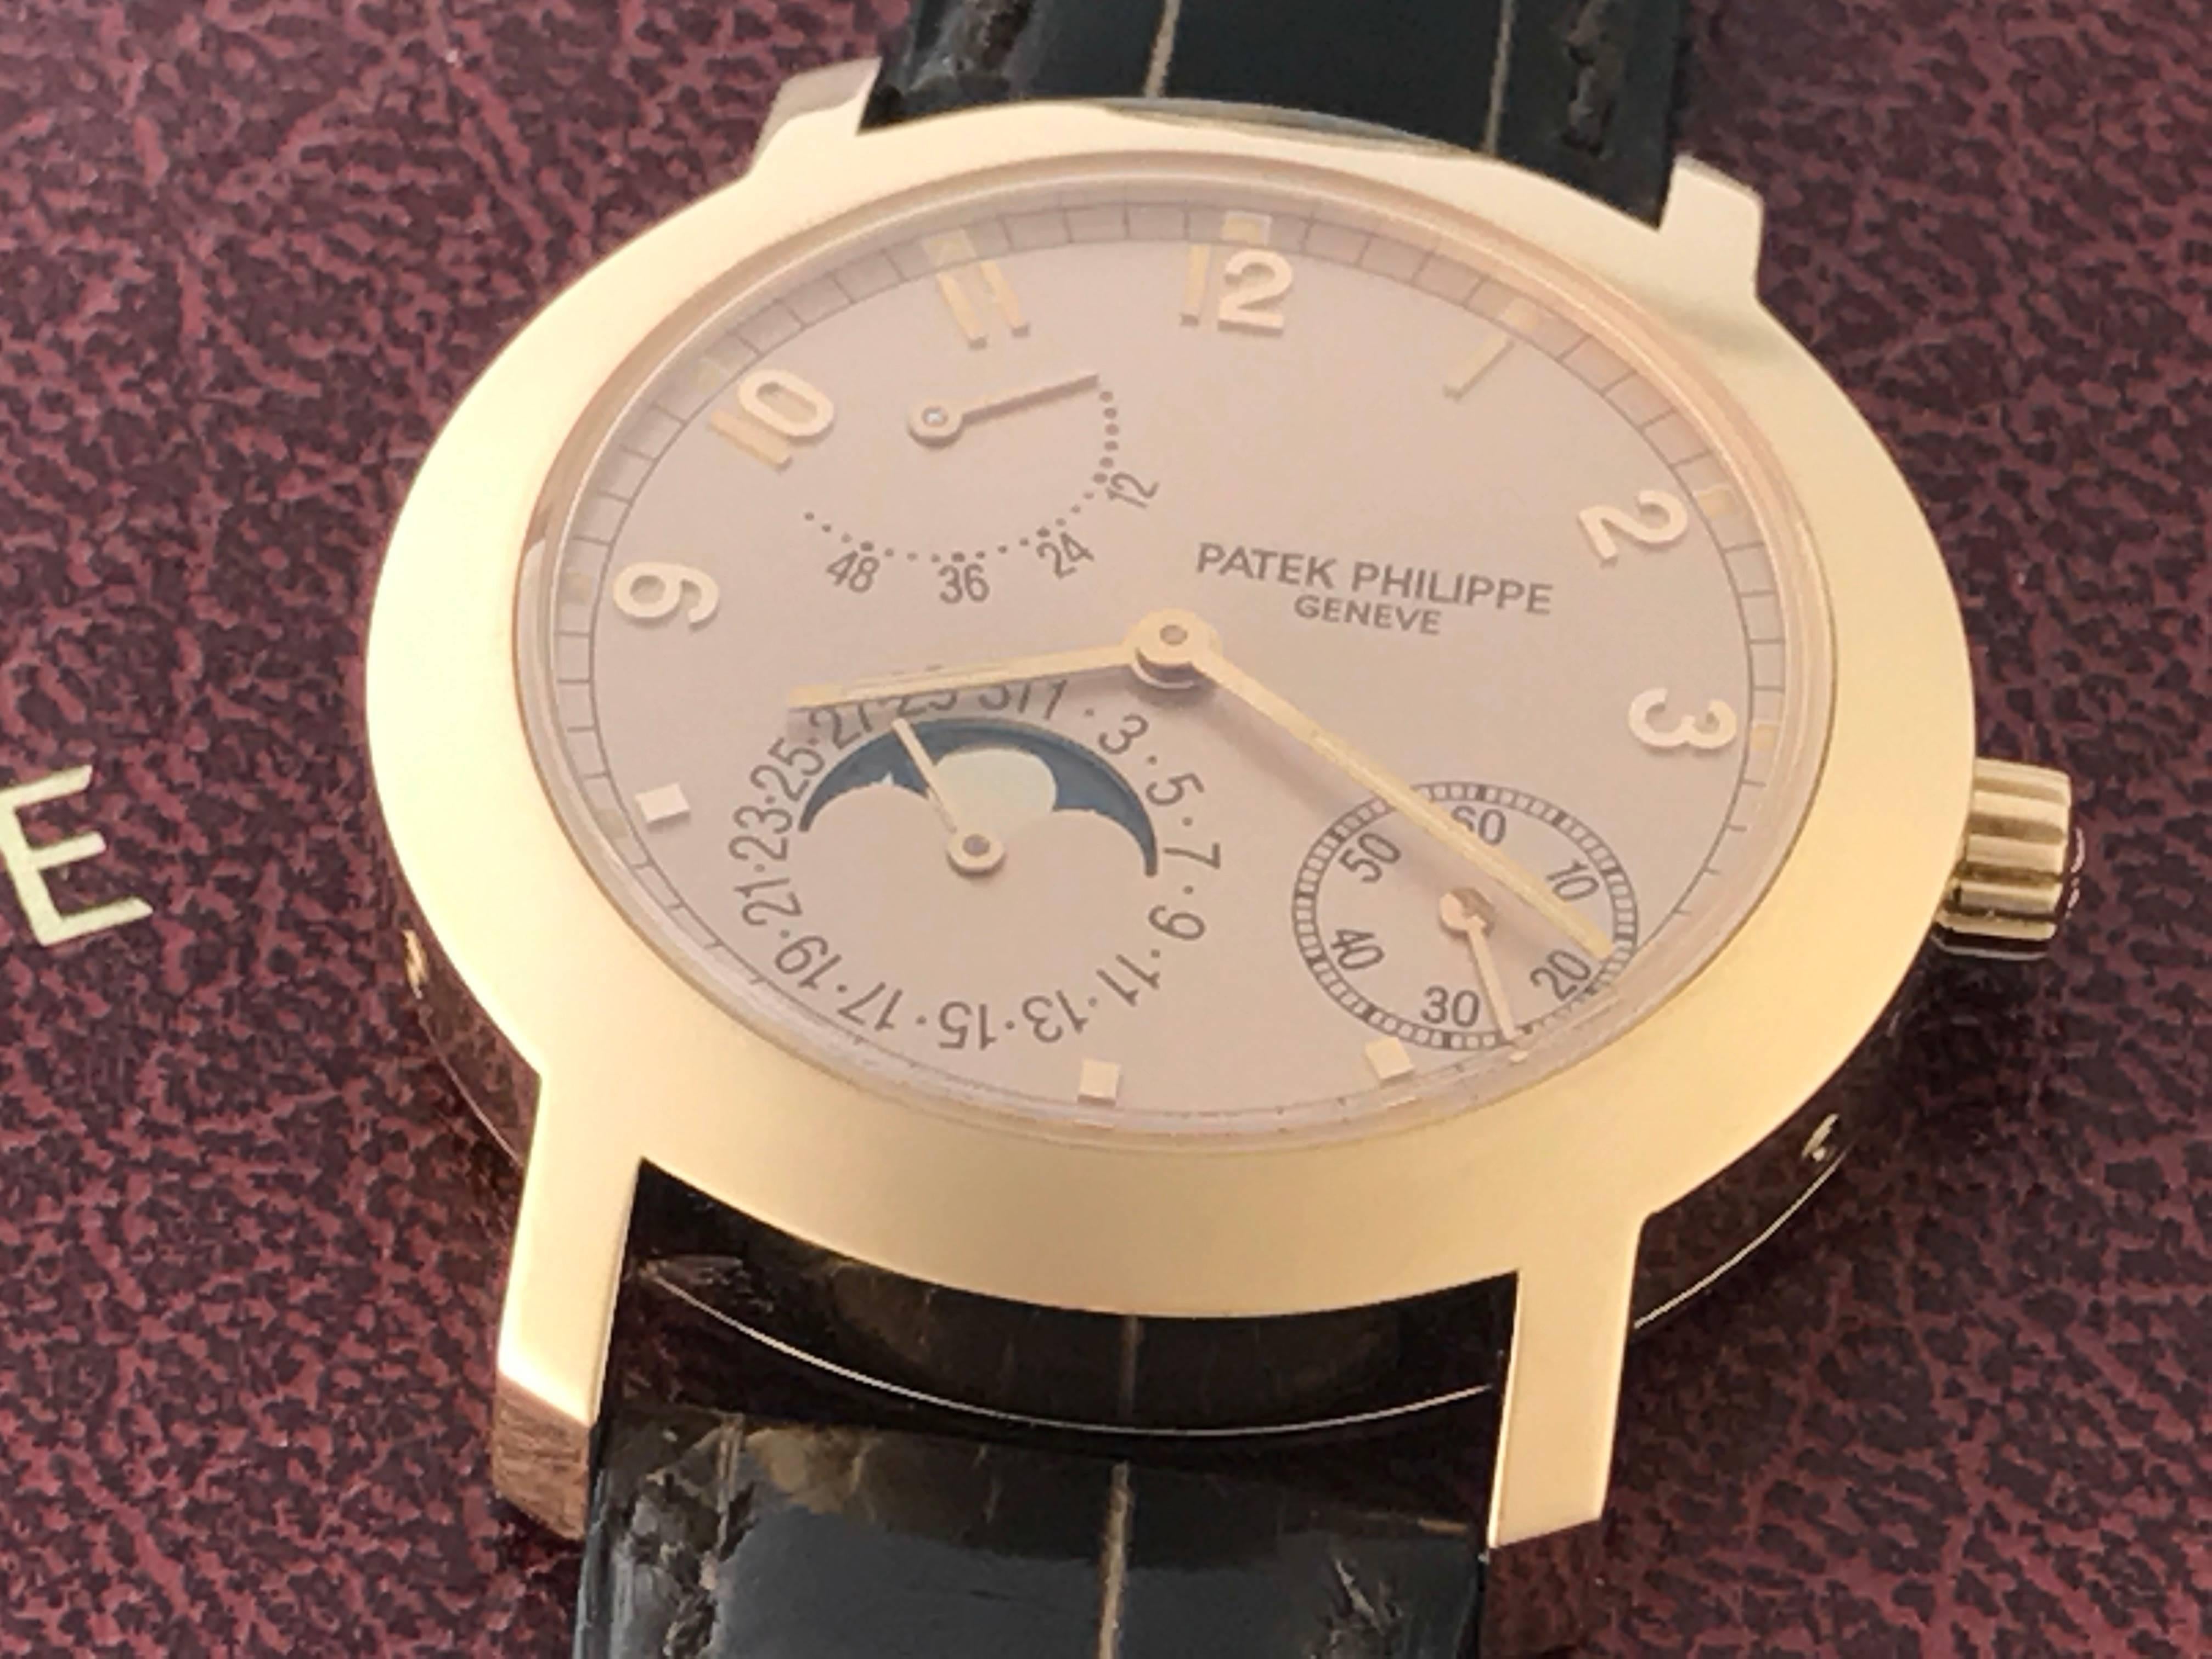 Patek Philippe 18k Rose Gold Moonphase Mens Automatic wind Wrist Watch. Model 5055R-001. Moonphase - Date with Power Reserve Indicator. Patek Philippe Caliber 240/164 with Twenty-Nine Jewels.  18k Rose Gold case with exposition back to view movement